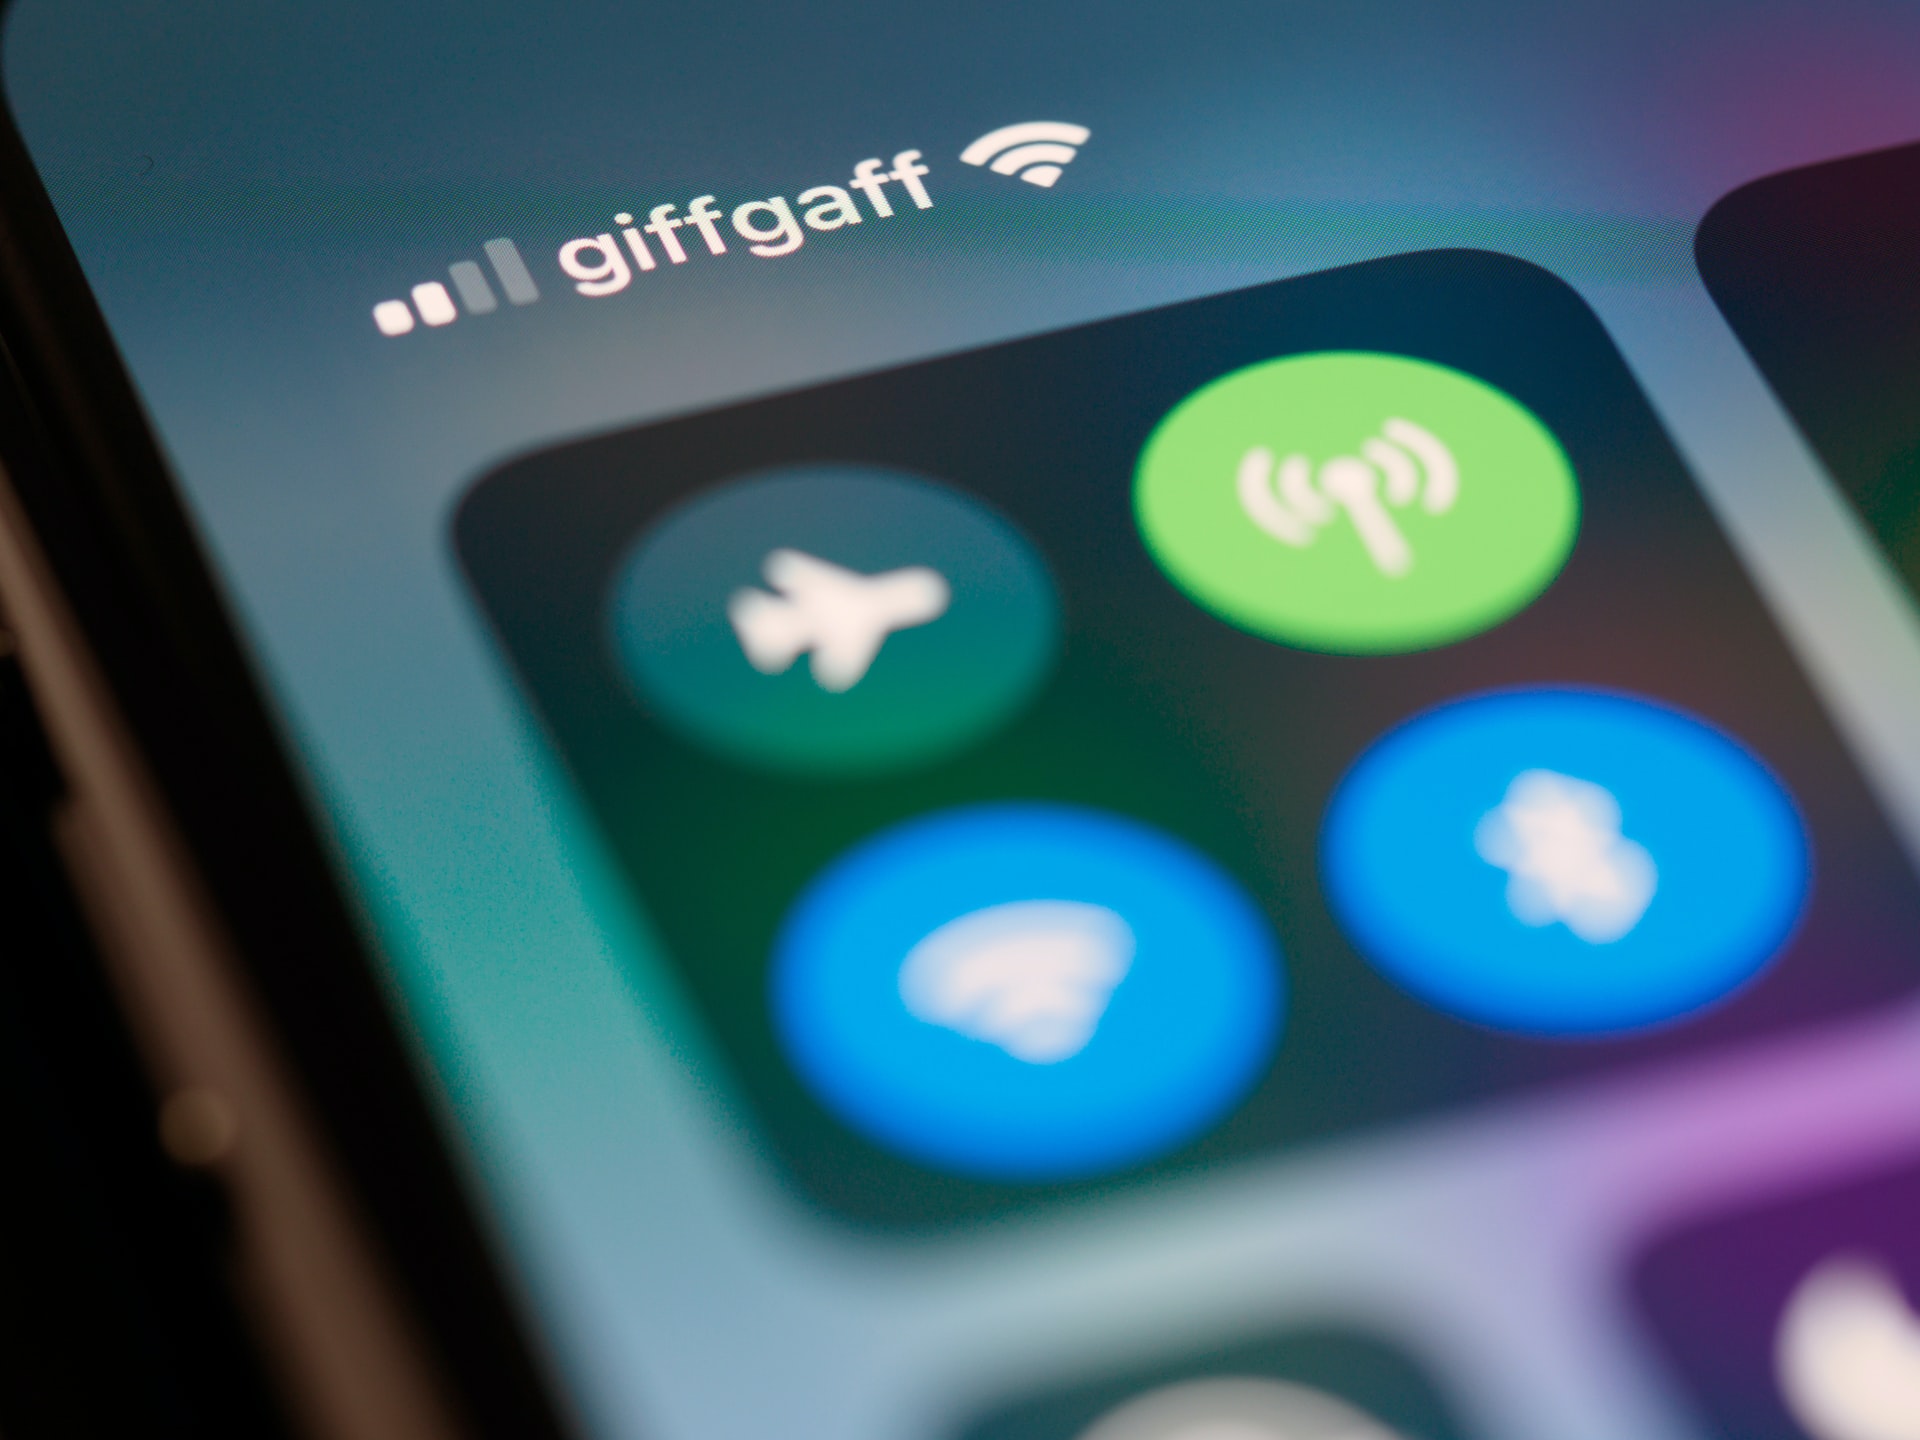 Looking for Free Wi-Fi? See Some Apps That Can Help